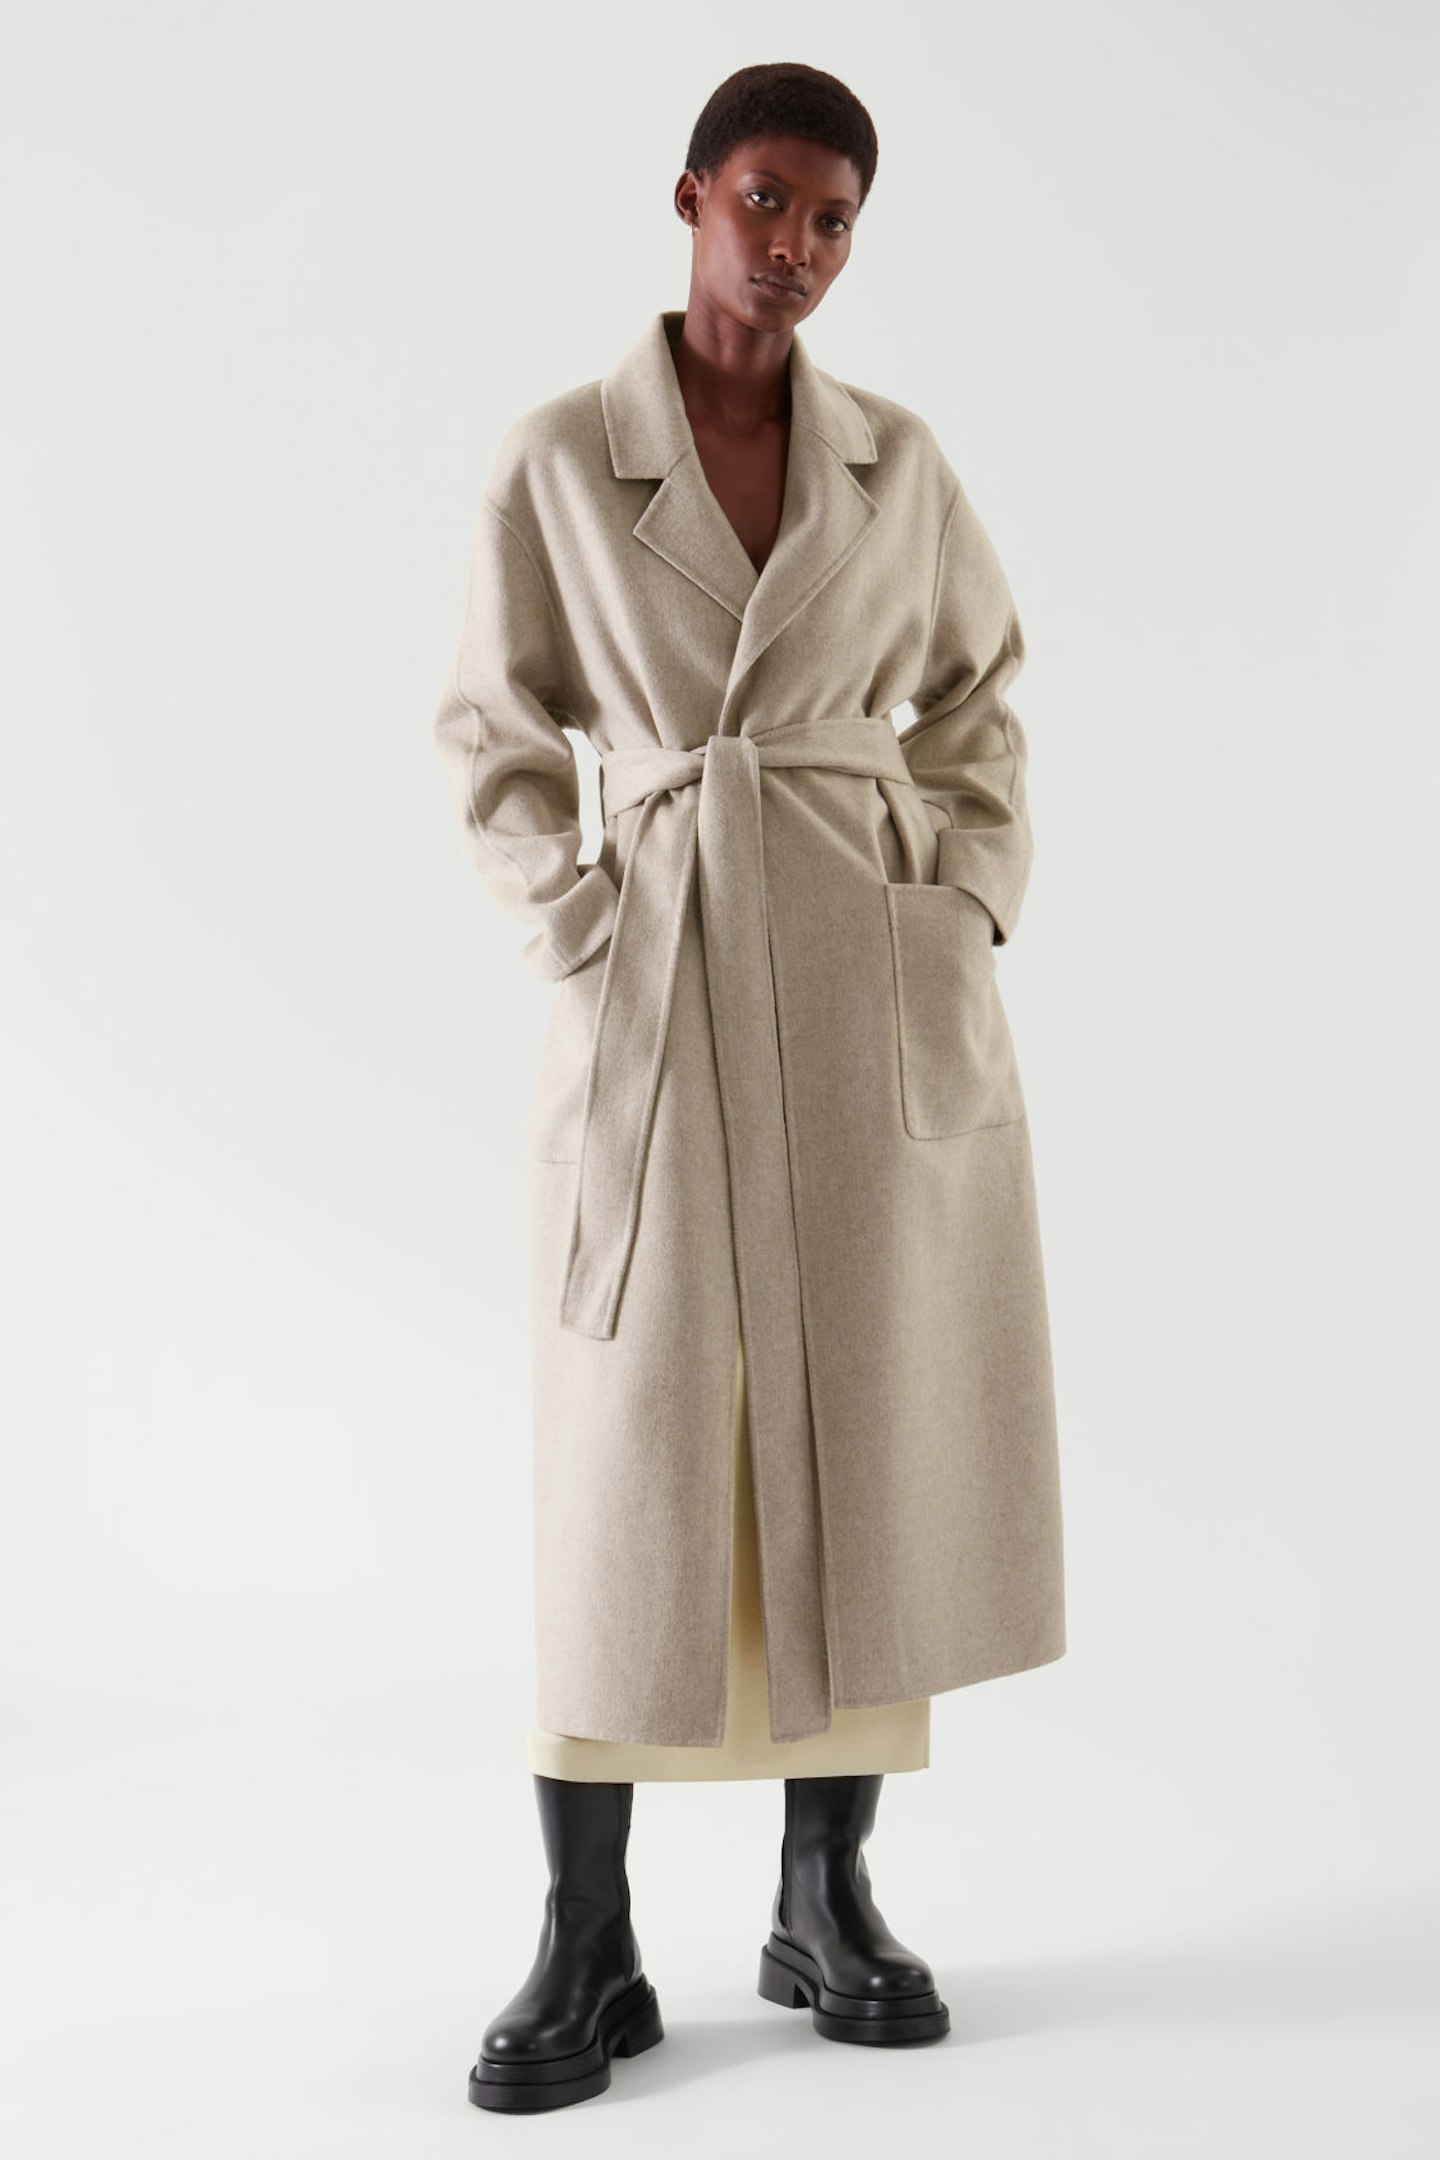 COS, Belted Wrap Coat, £190